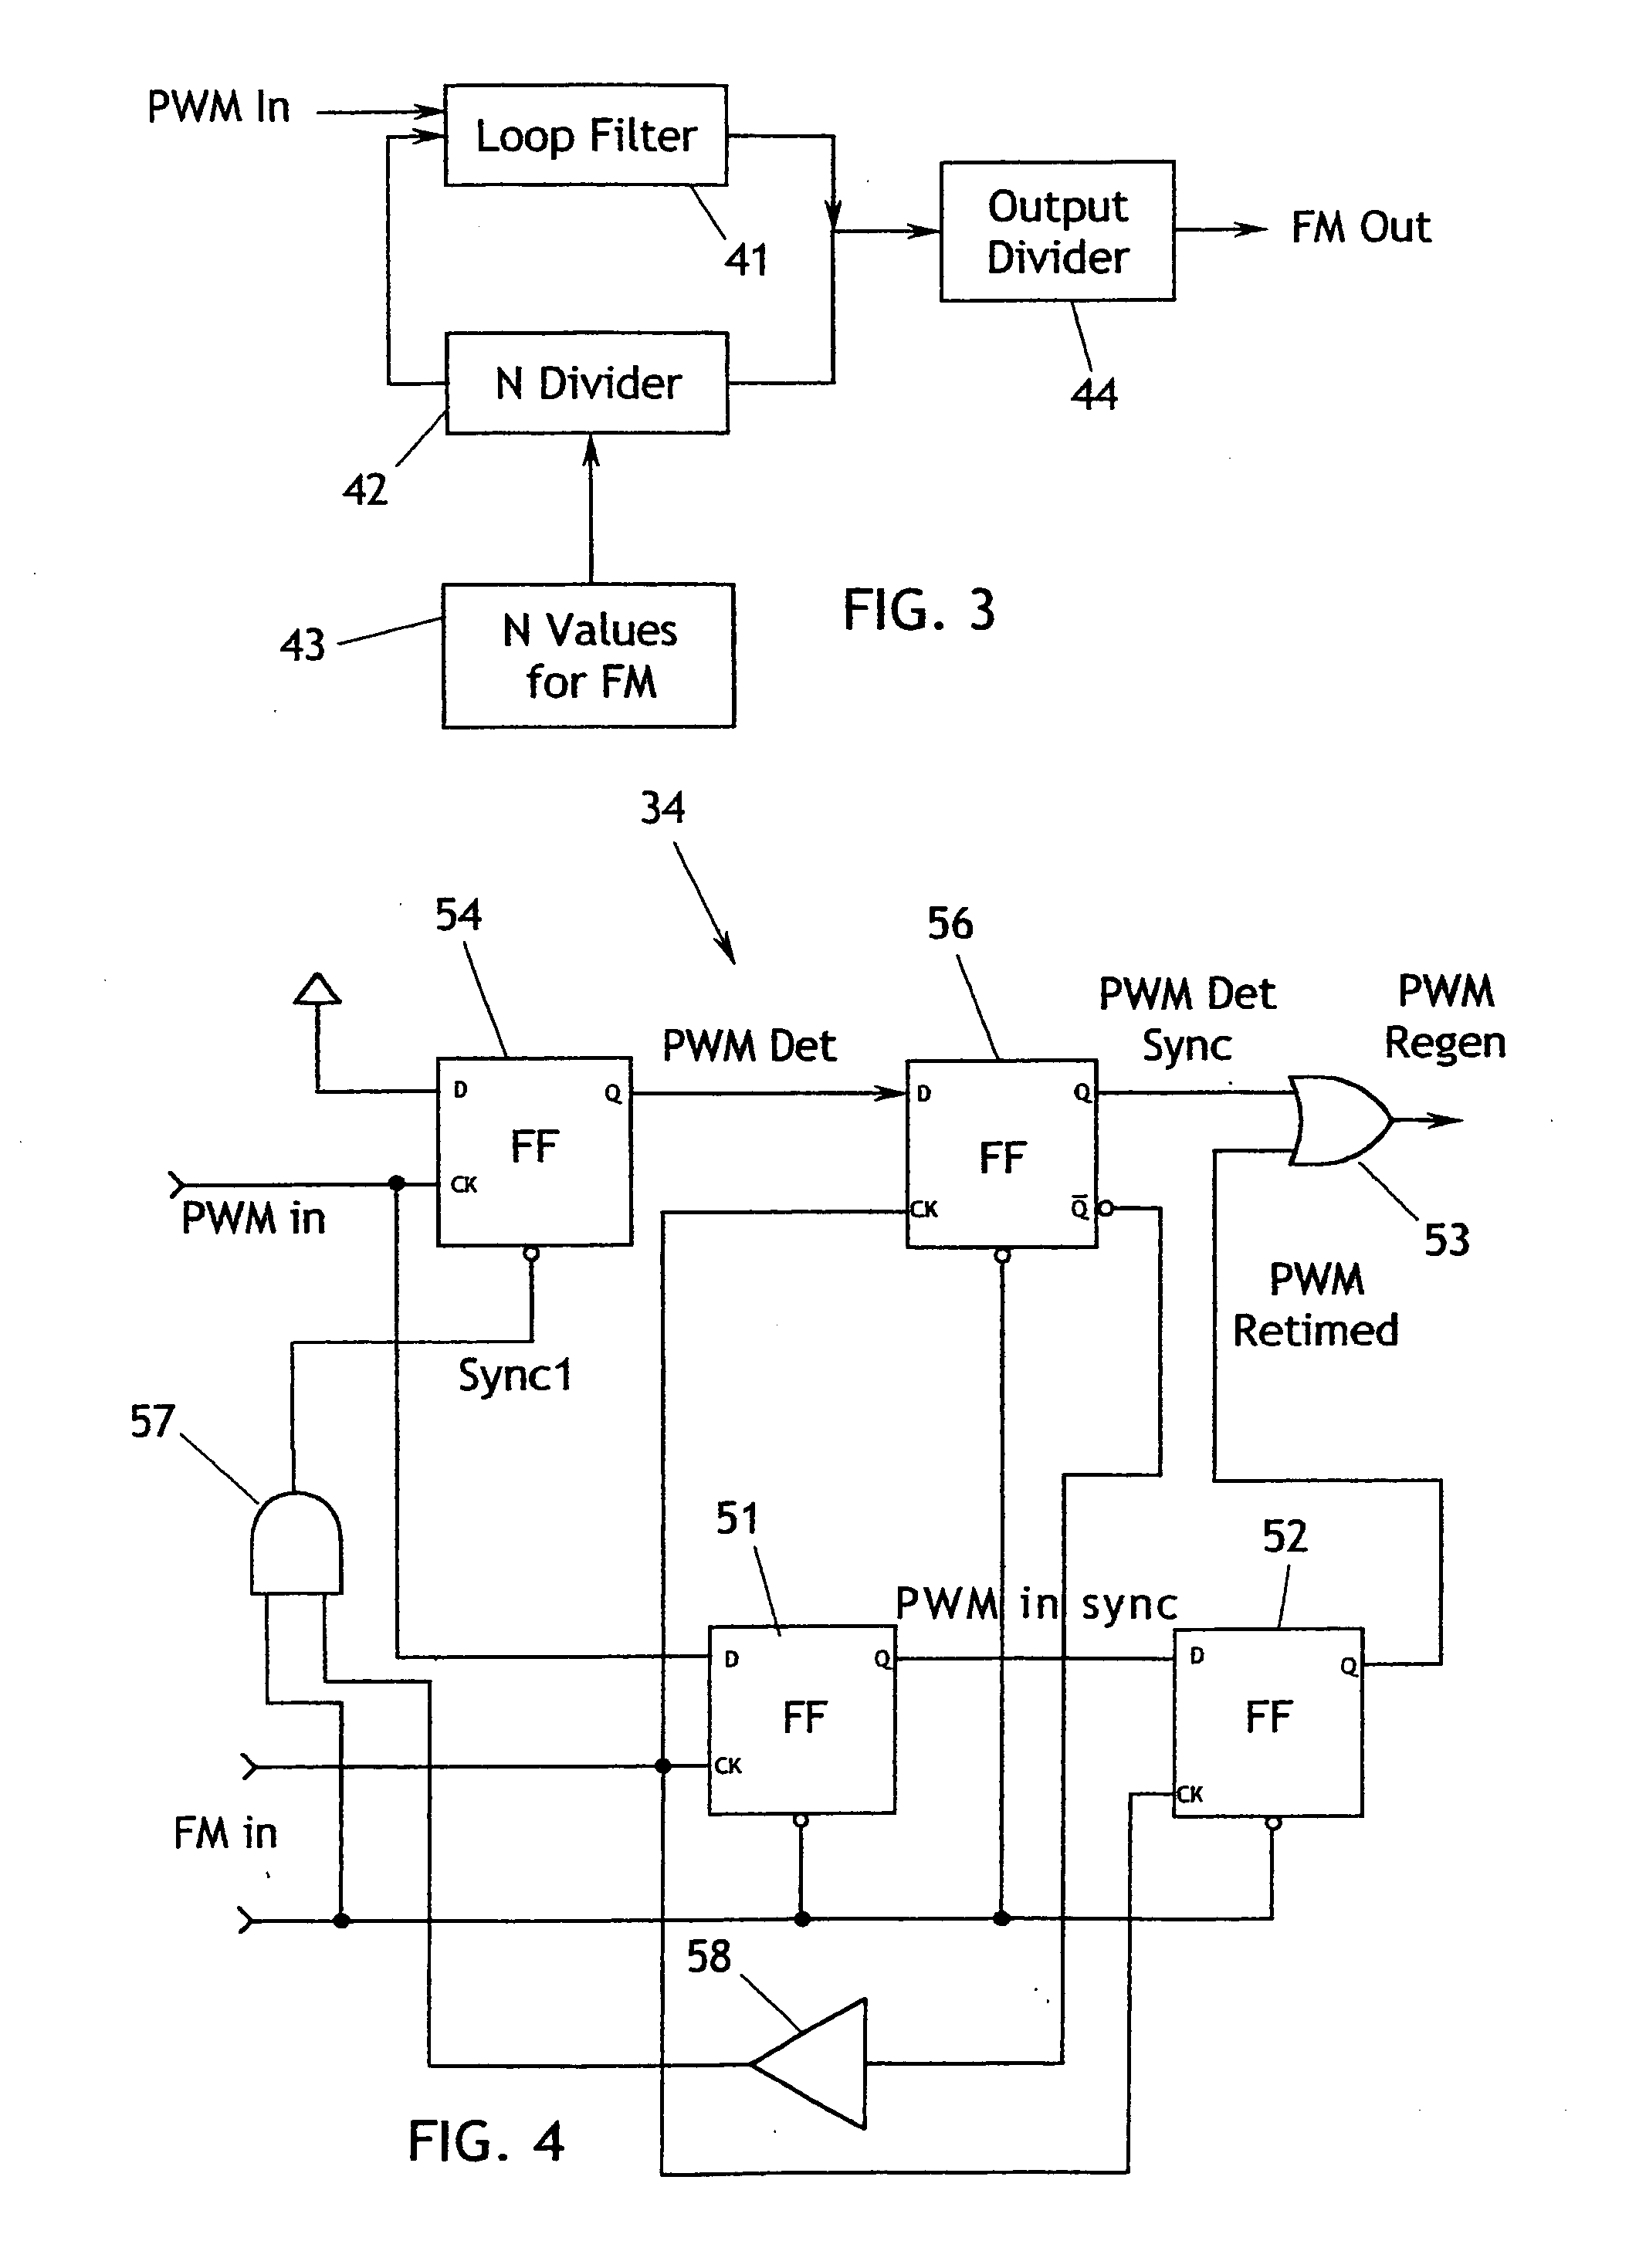 Method and apparatus for frequency modulating a periodic signal of varying duty cycle